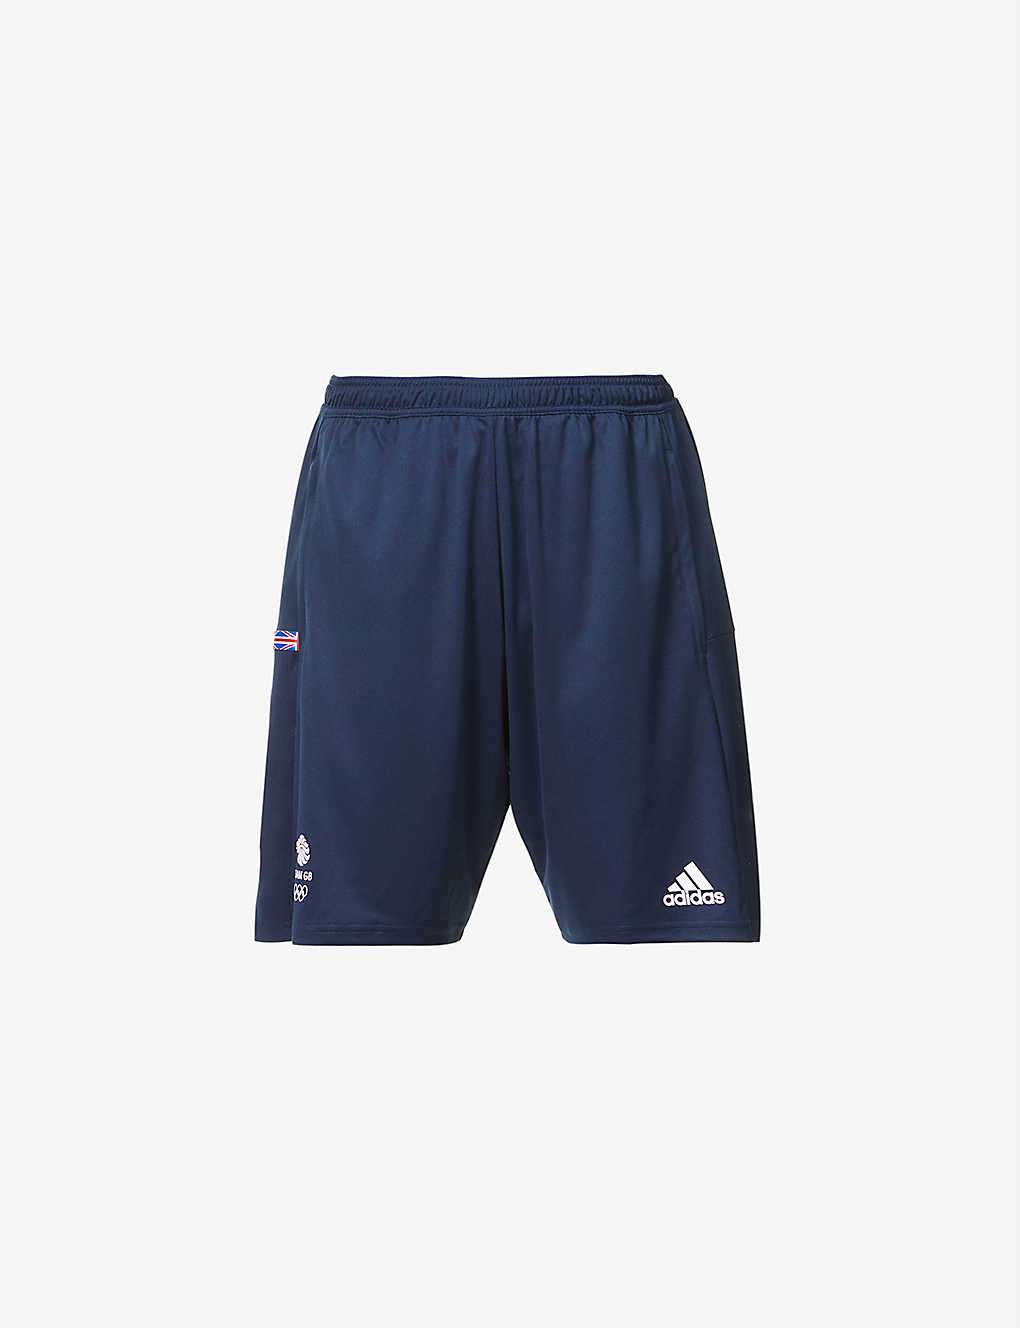 Team GB Tennis recycled-polyester shorts(9423093)